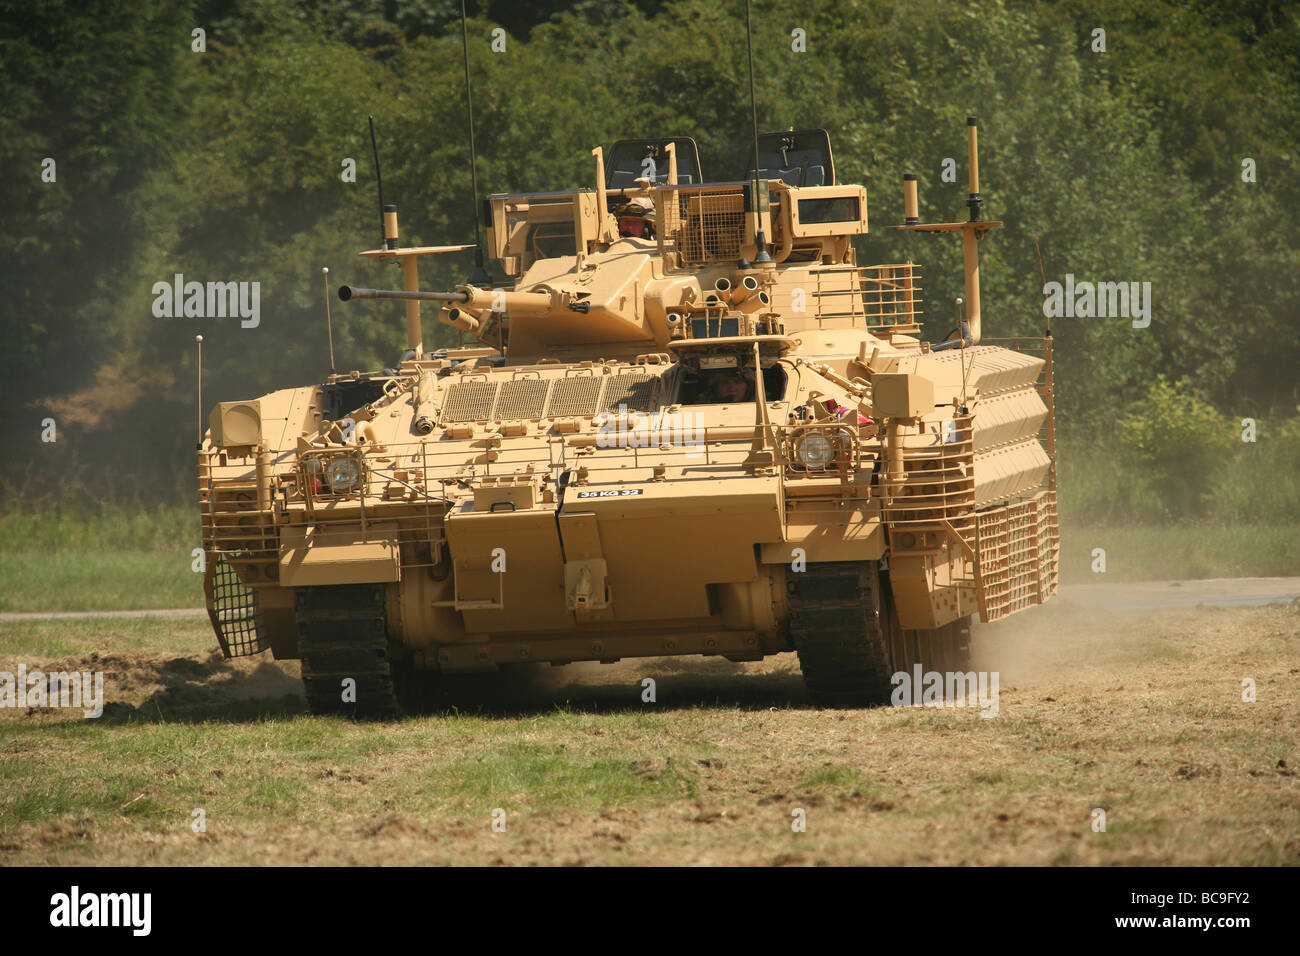 warrior armoured carrier and tank on display at British military event Stock Photo